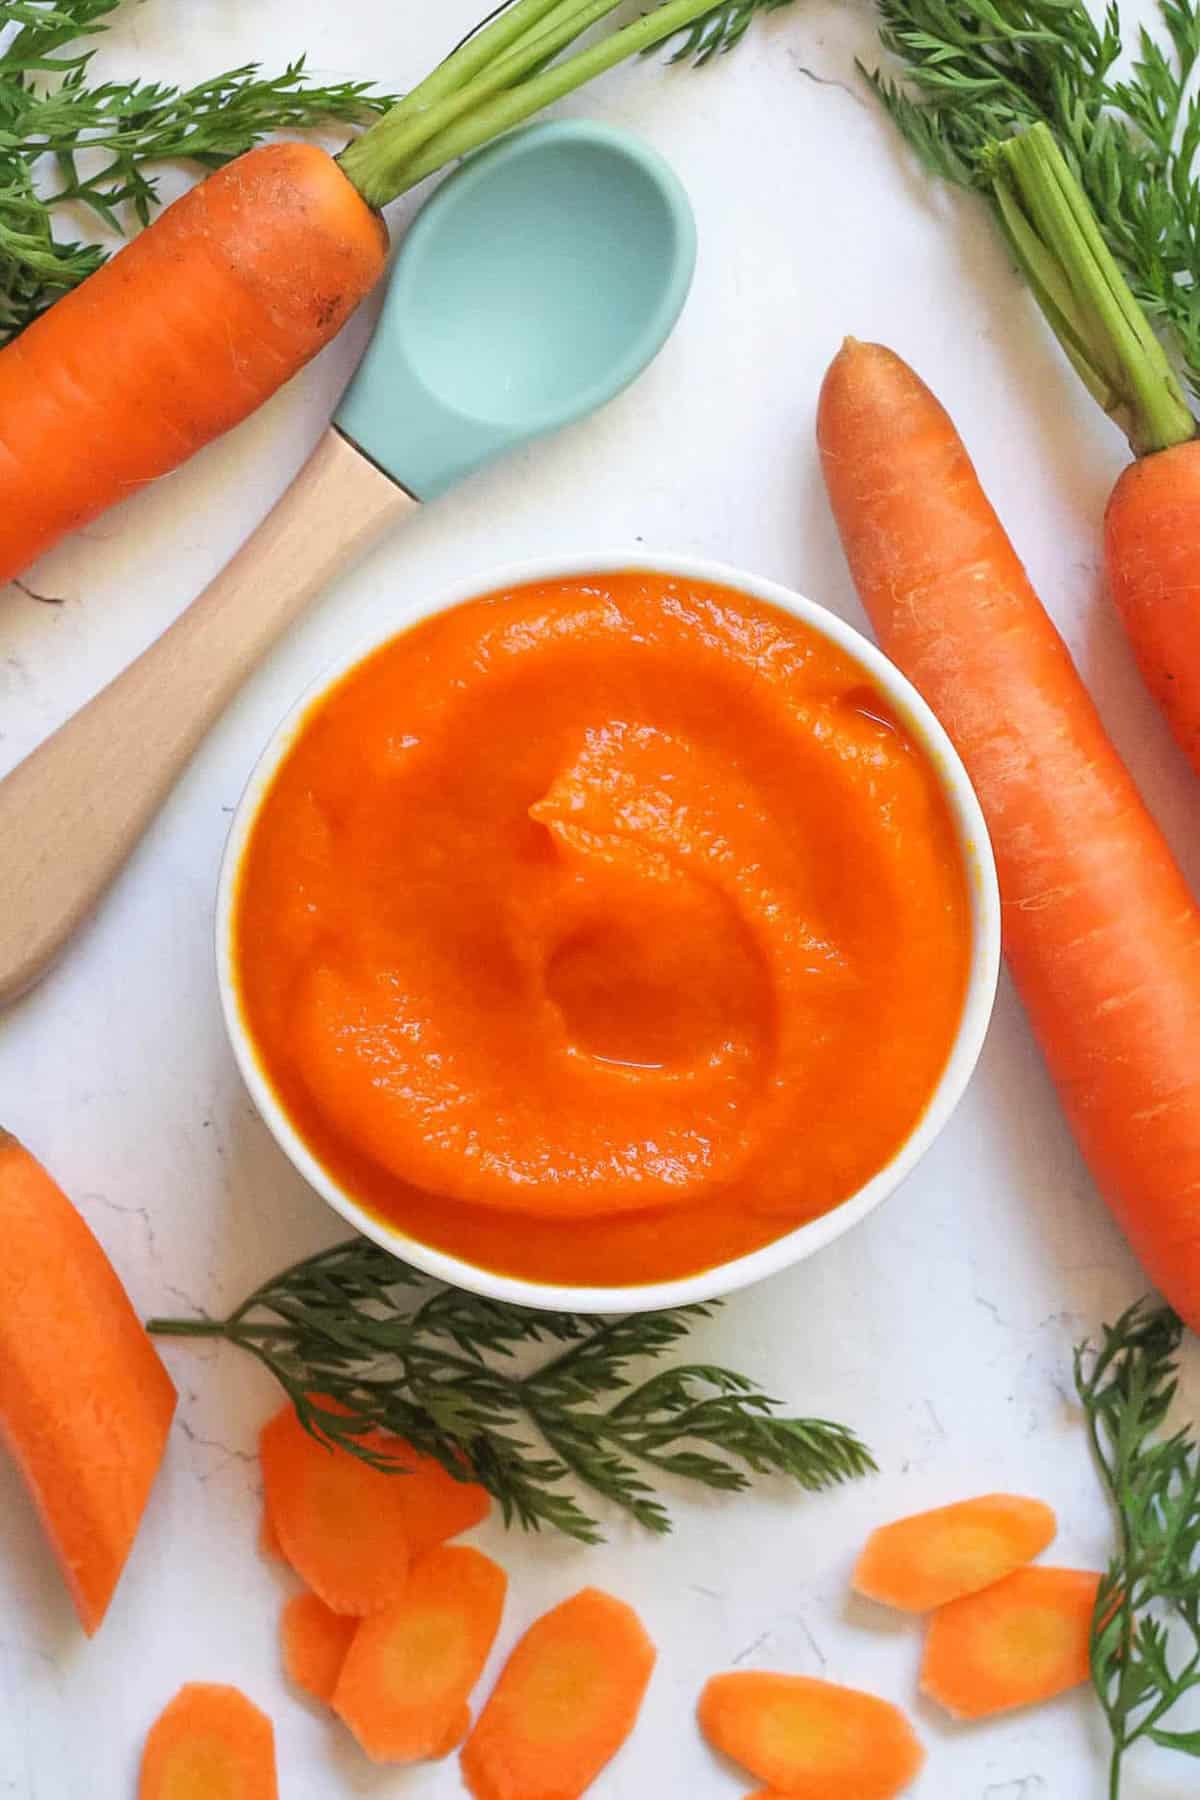 Carrot baby food puree in a white bowl.